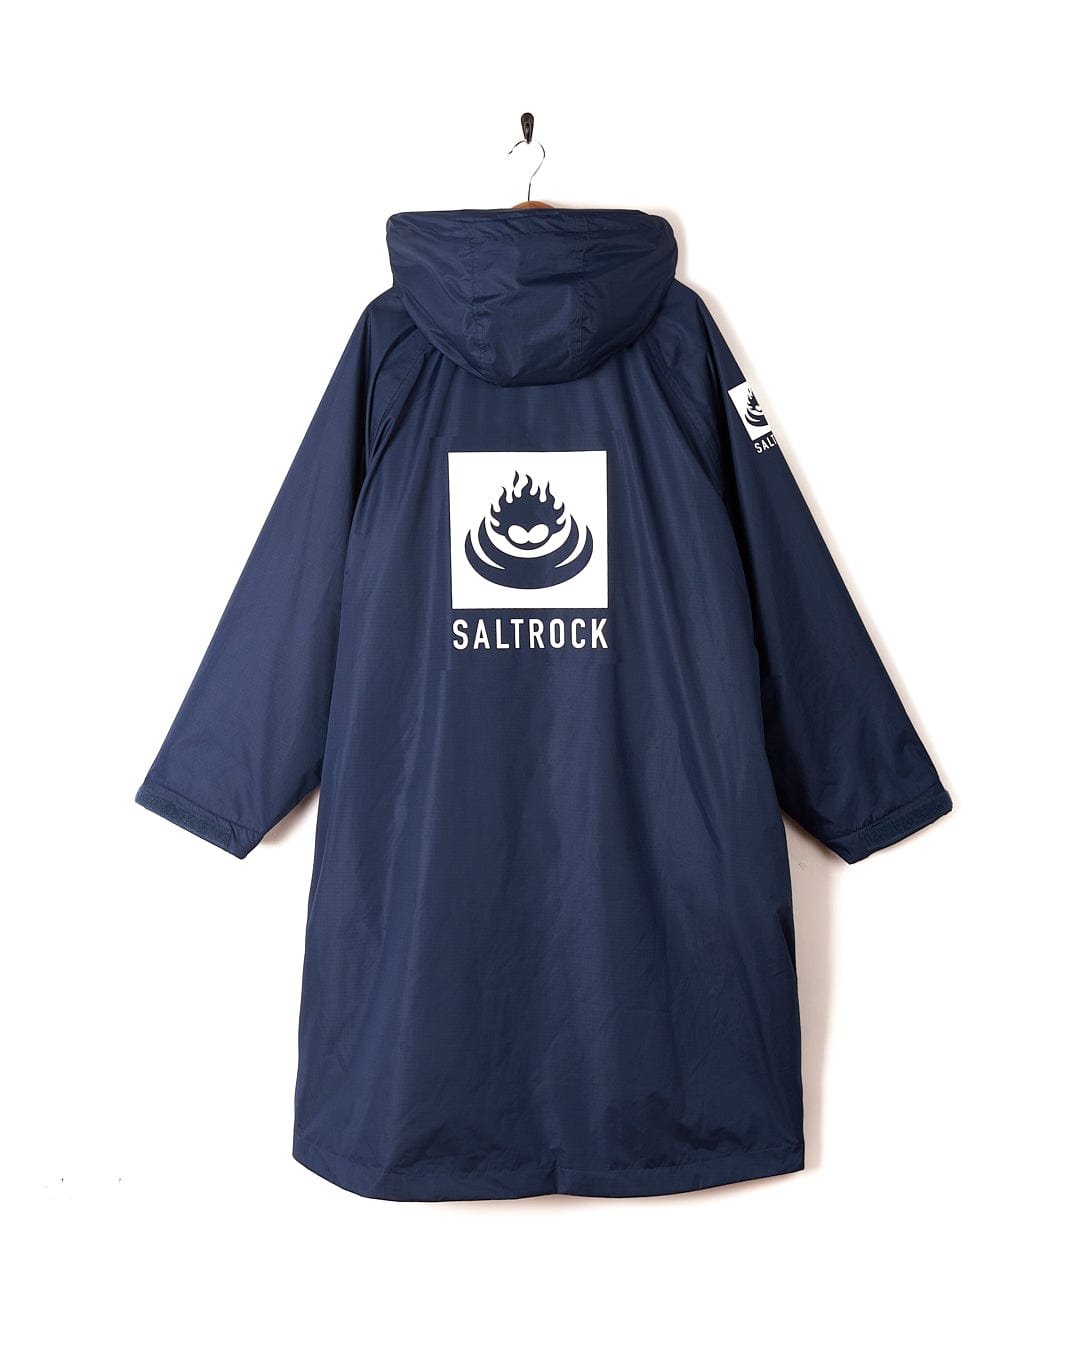 A Four Seasons - Waterproof Changing Robe - Blue with a Saltrock logo on it.